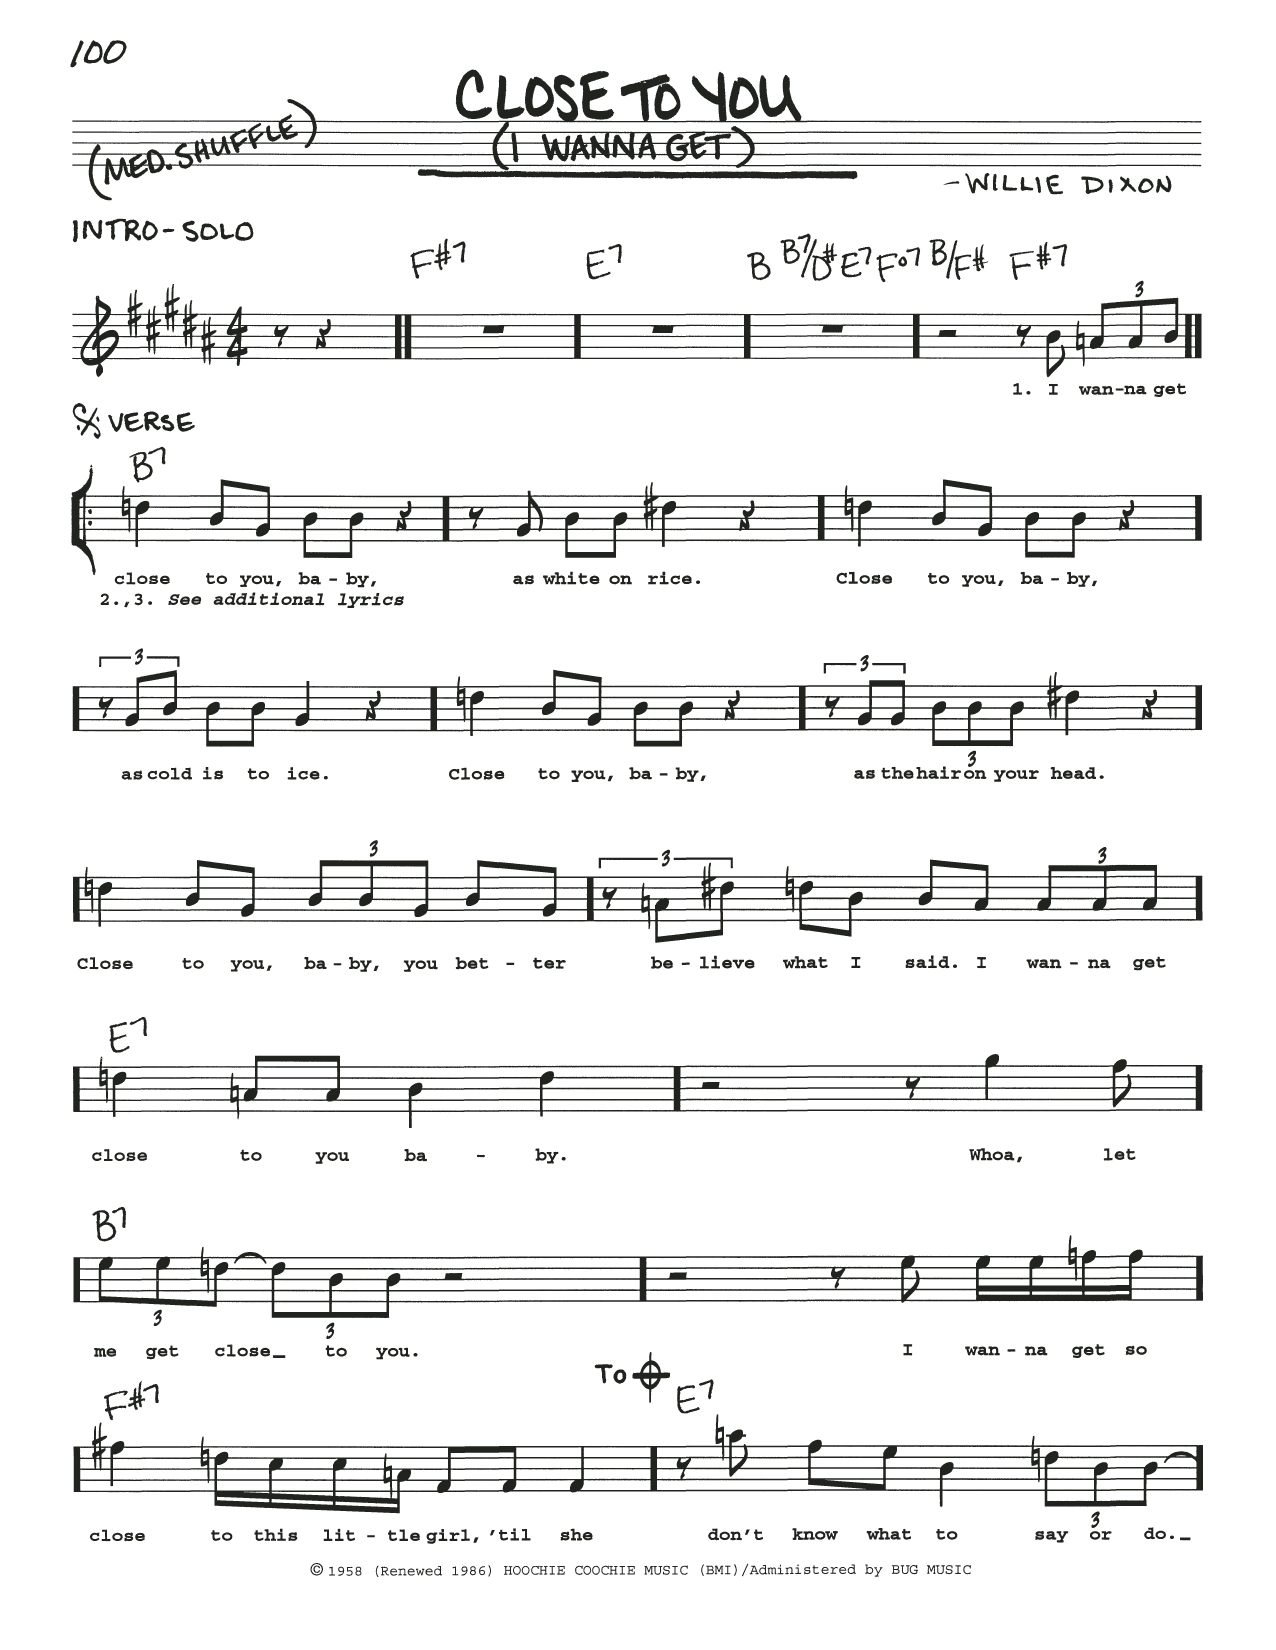 Download Muddy Waters Close To You (I Wanna Get) Sheet Music